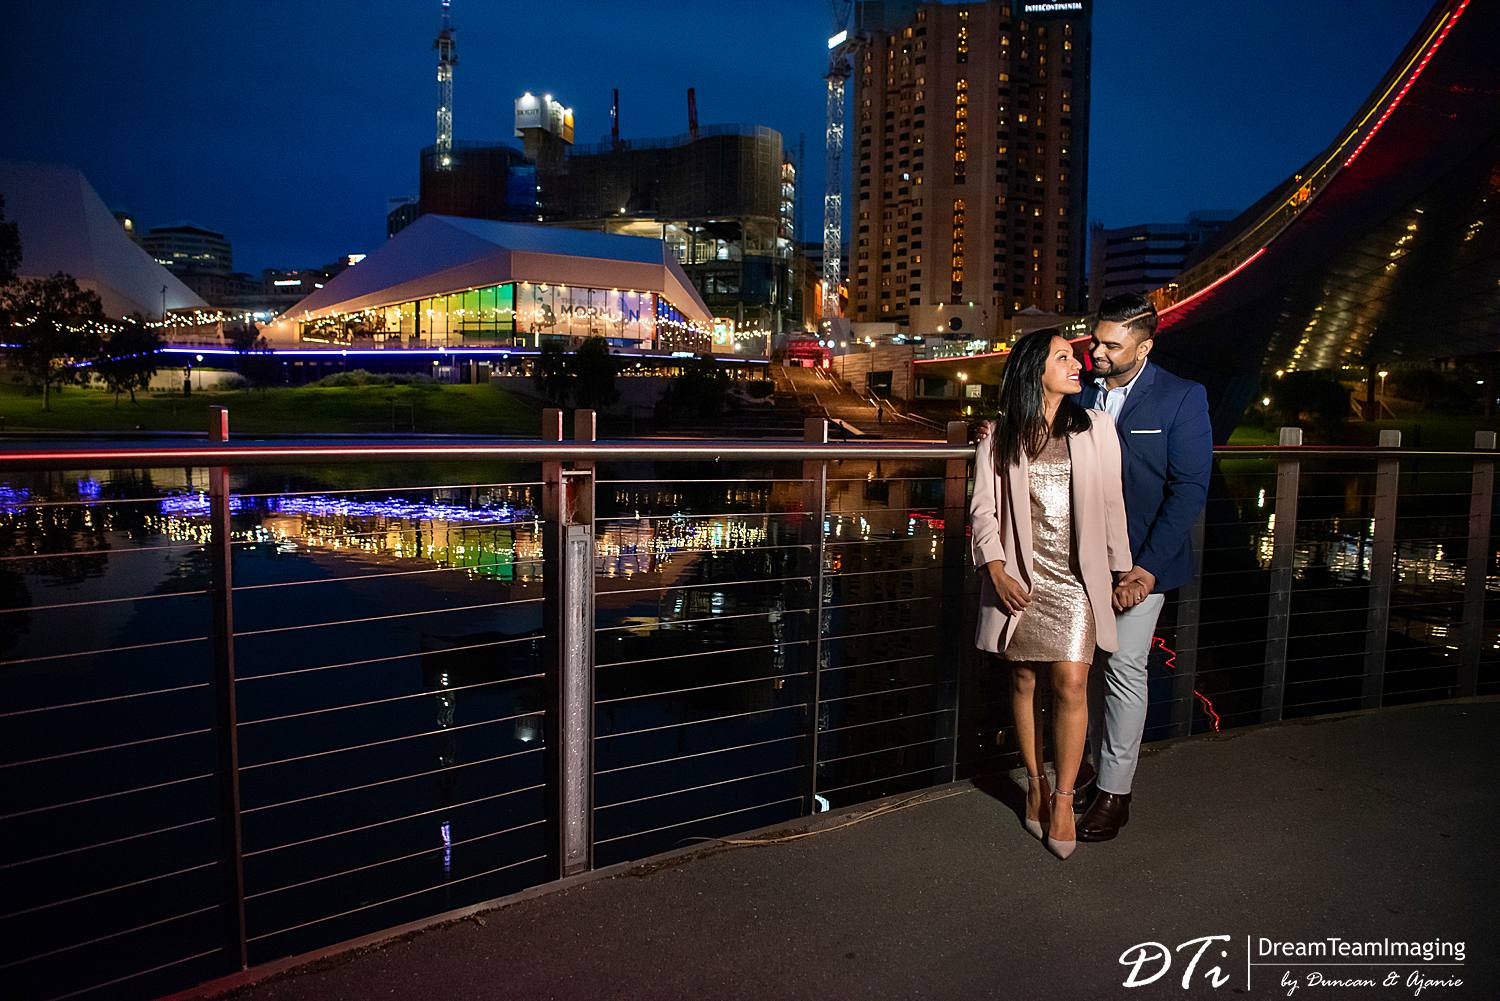 Engagement photography session, Sunset engagement session in Adelaide, Couple engagement at Dusk at Adelaide, Sri Lankan couple engagement photos